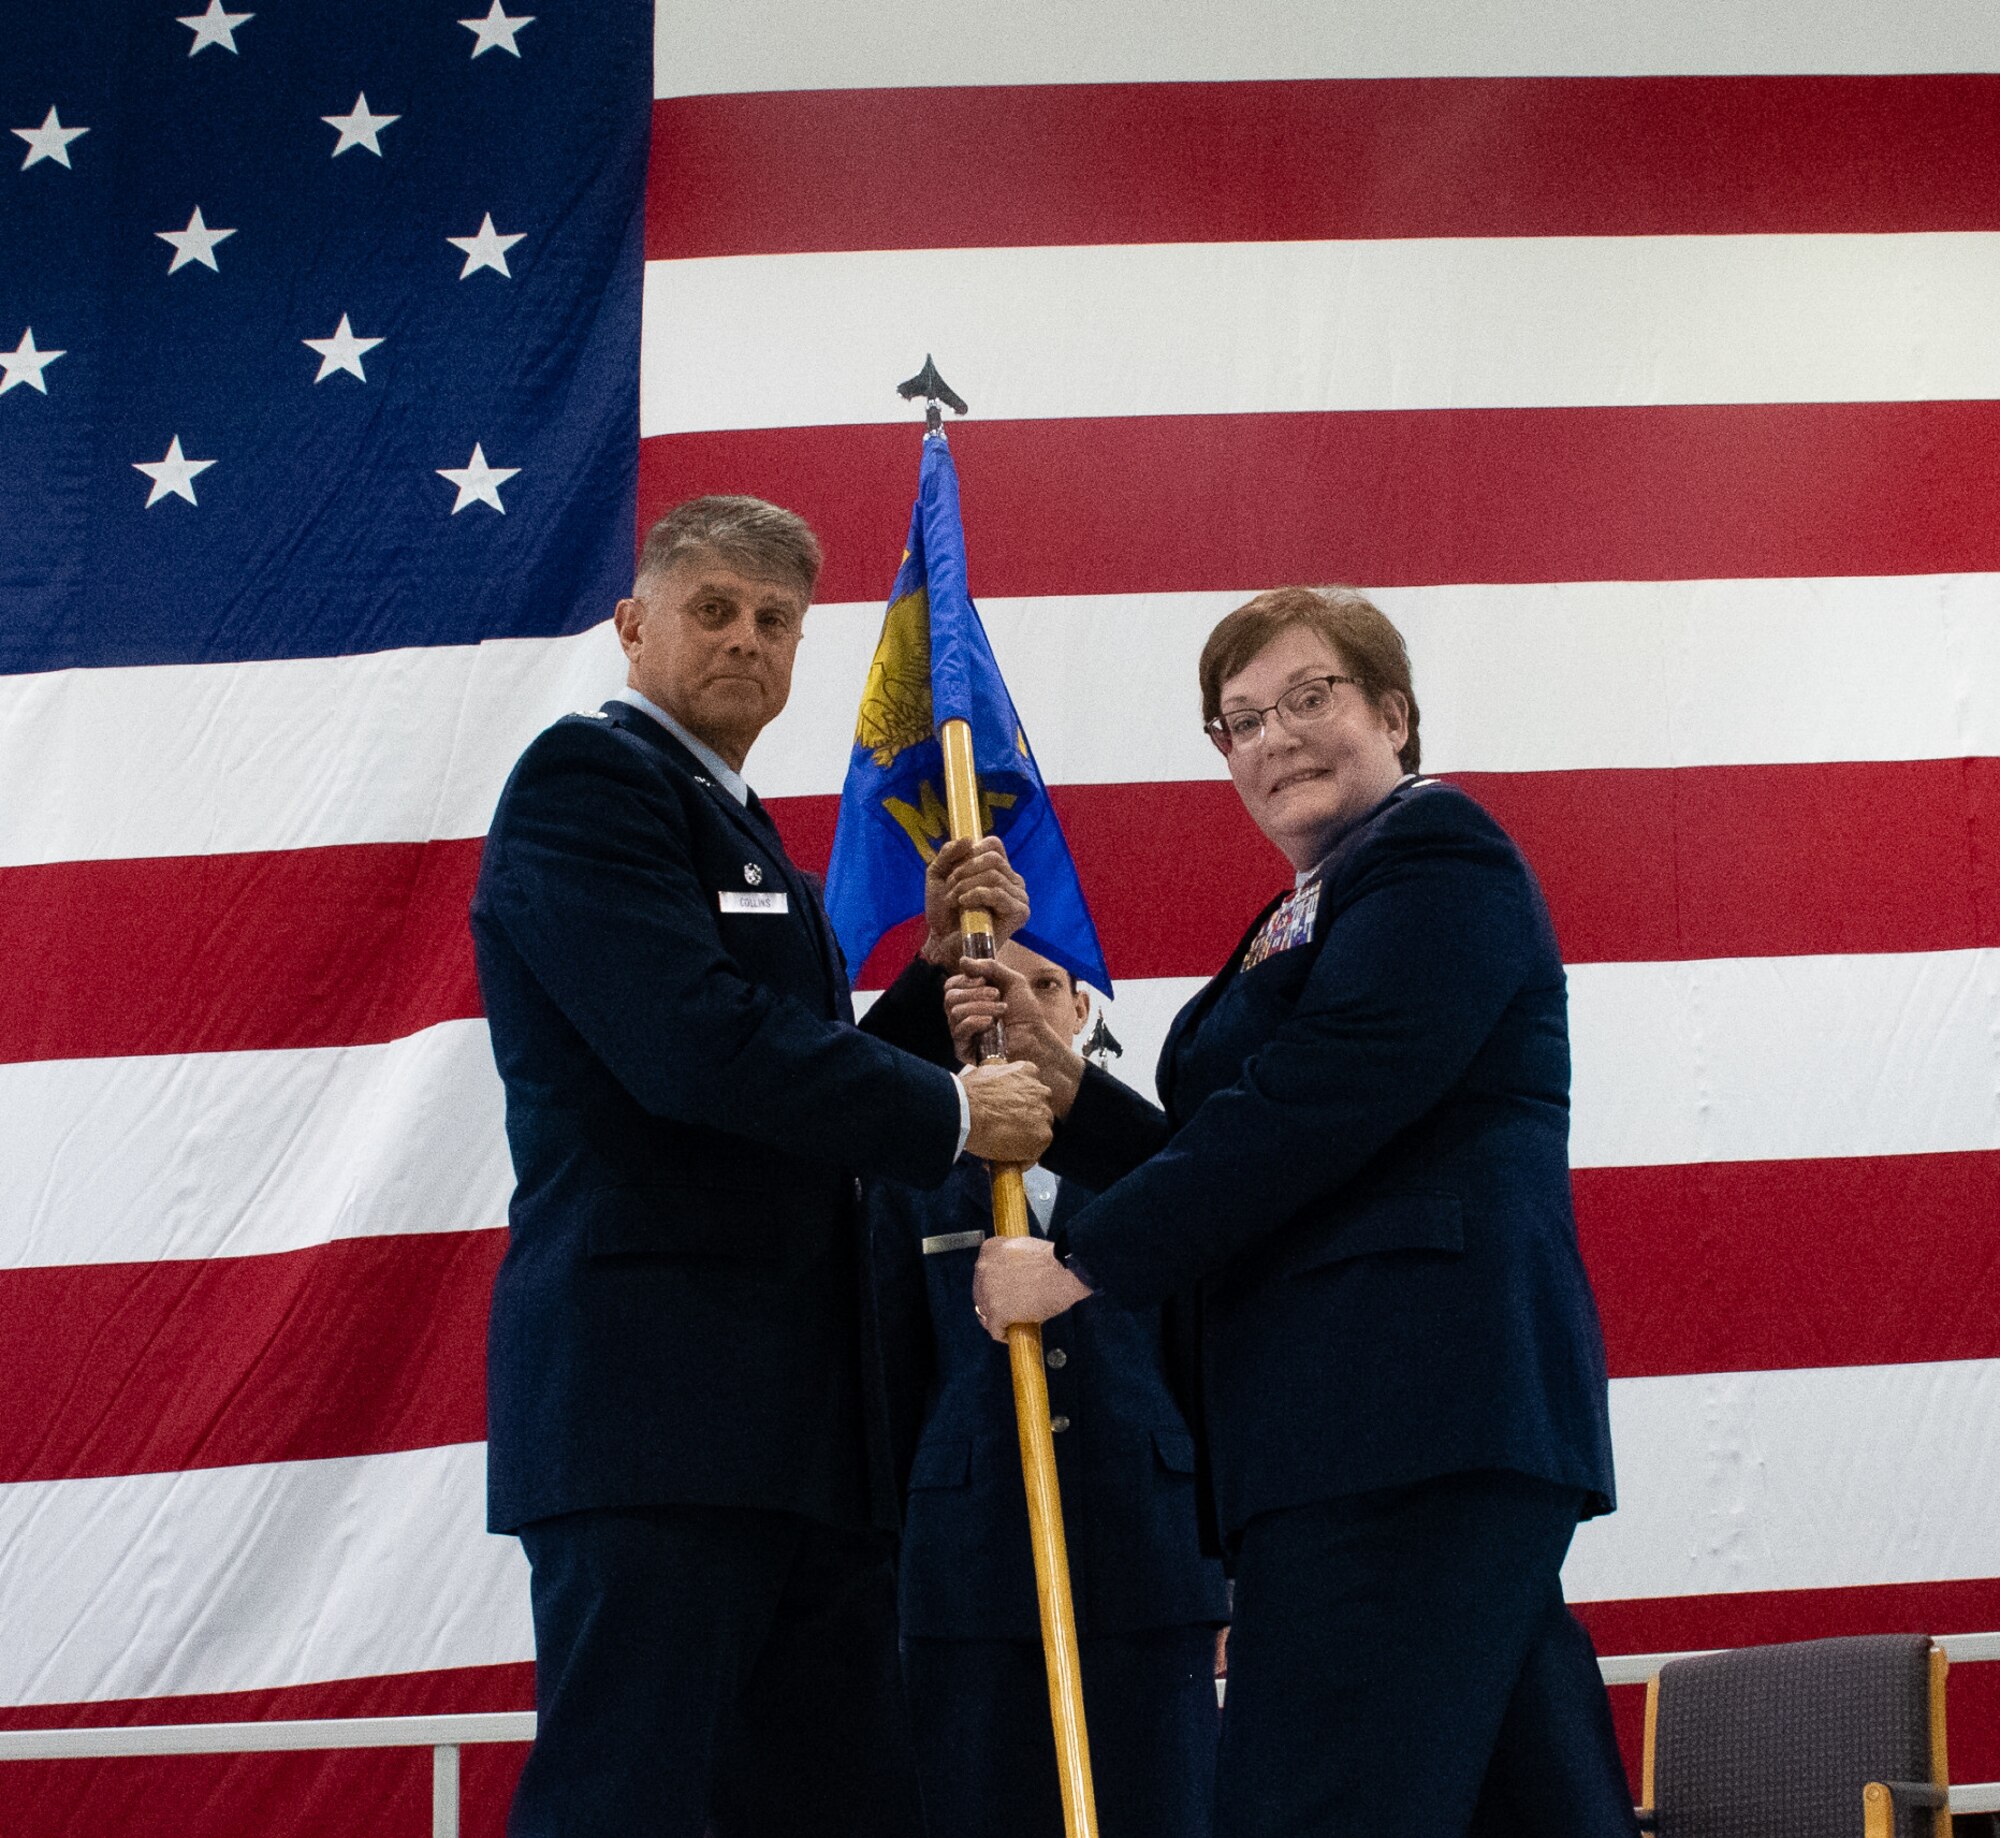 Col. Glenn Collins, 932nd Airlift Wing commander, presents Lt. Col. Amy Johannsen 932nd Maintenance Group commander, with the group guidon during an assumption of command ceremony at Scott Air Force Base, Ill. on March 6.  (U.S. Air Force photo by Maj. Neil Samson)